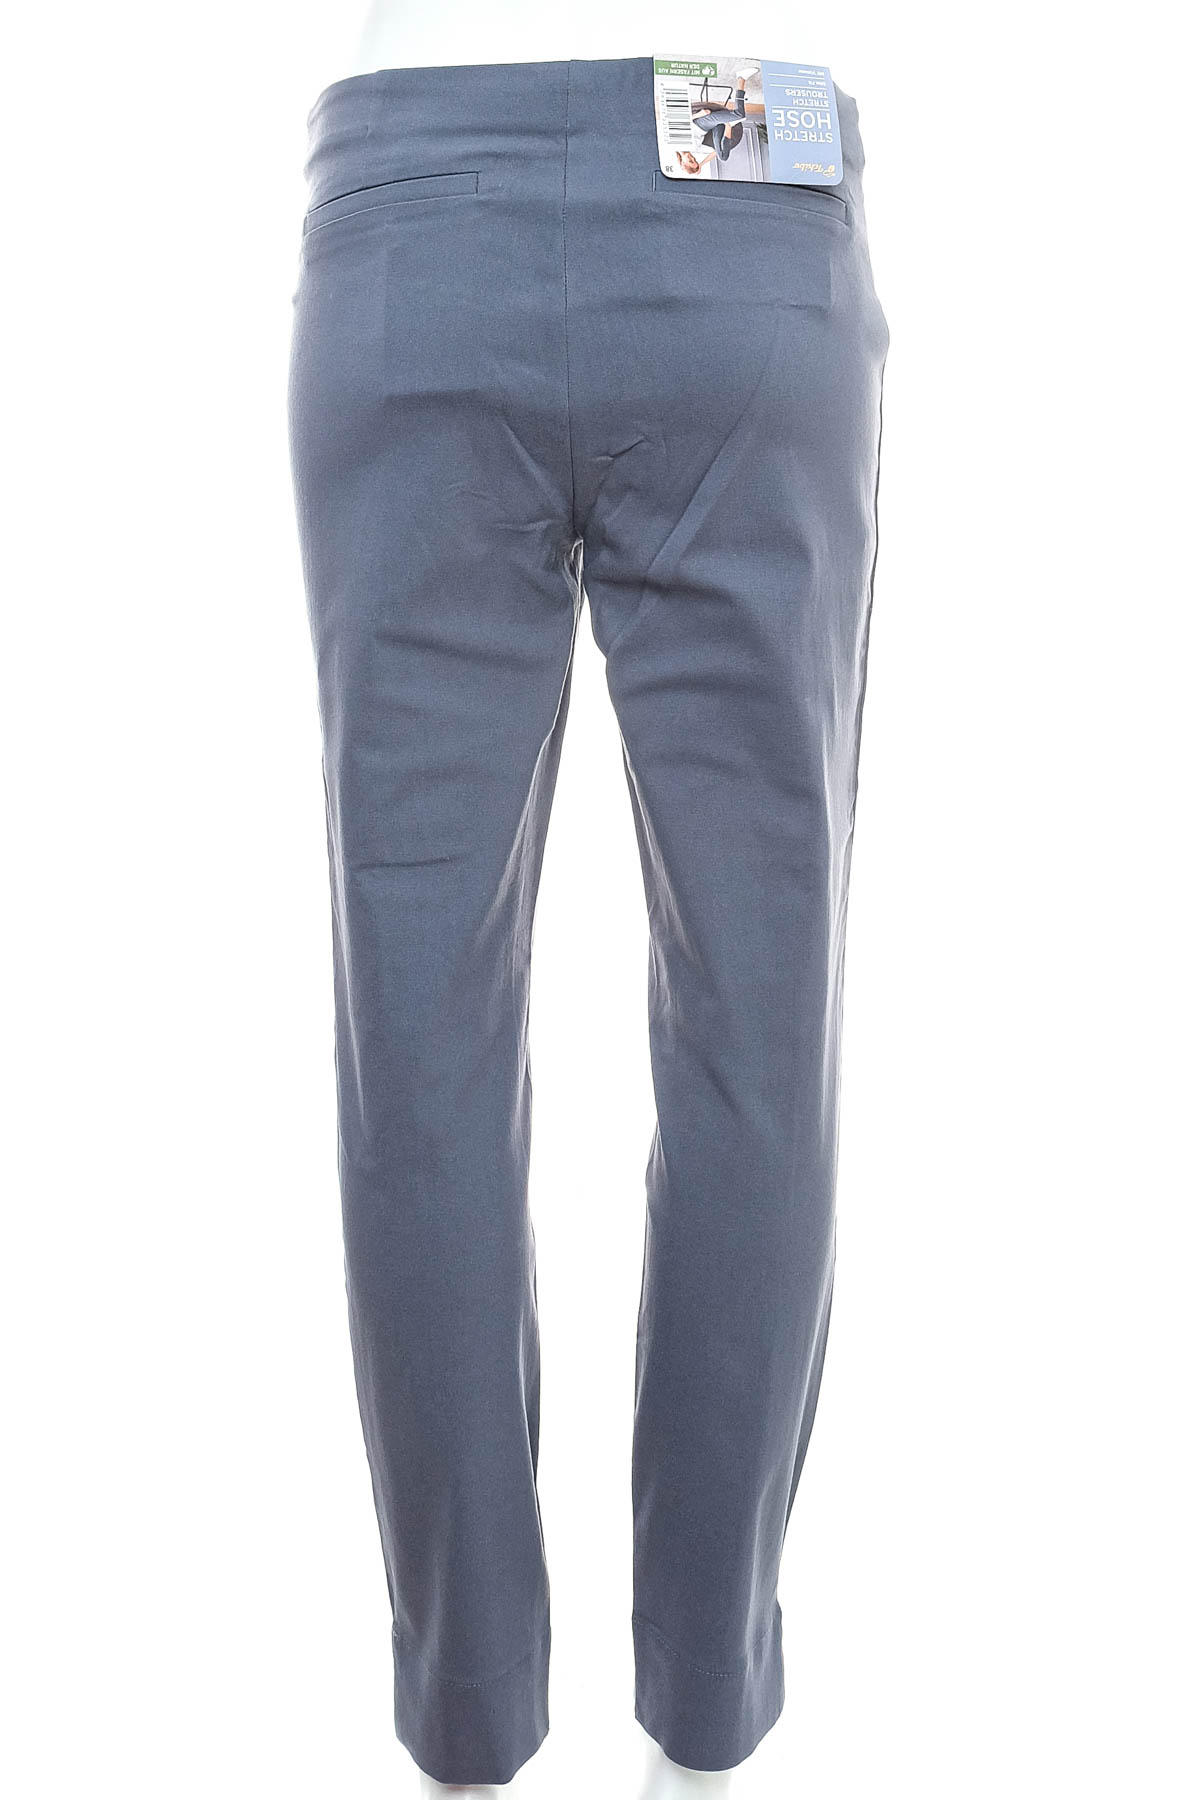 Women's trousers - WOMEN essentials by Tchibo - 1